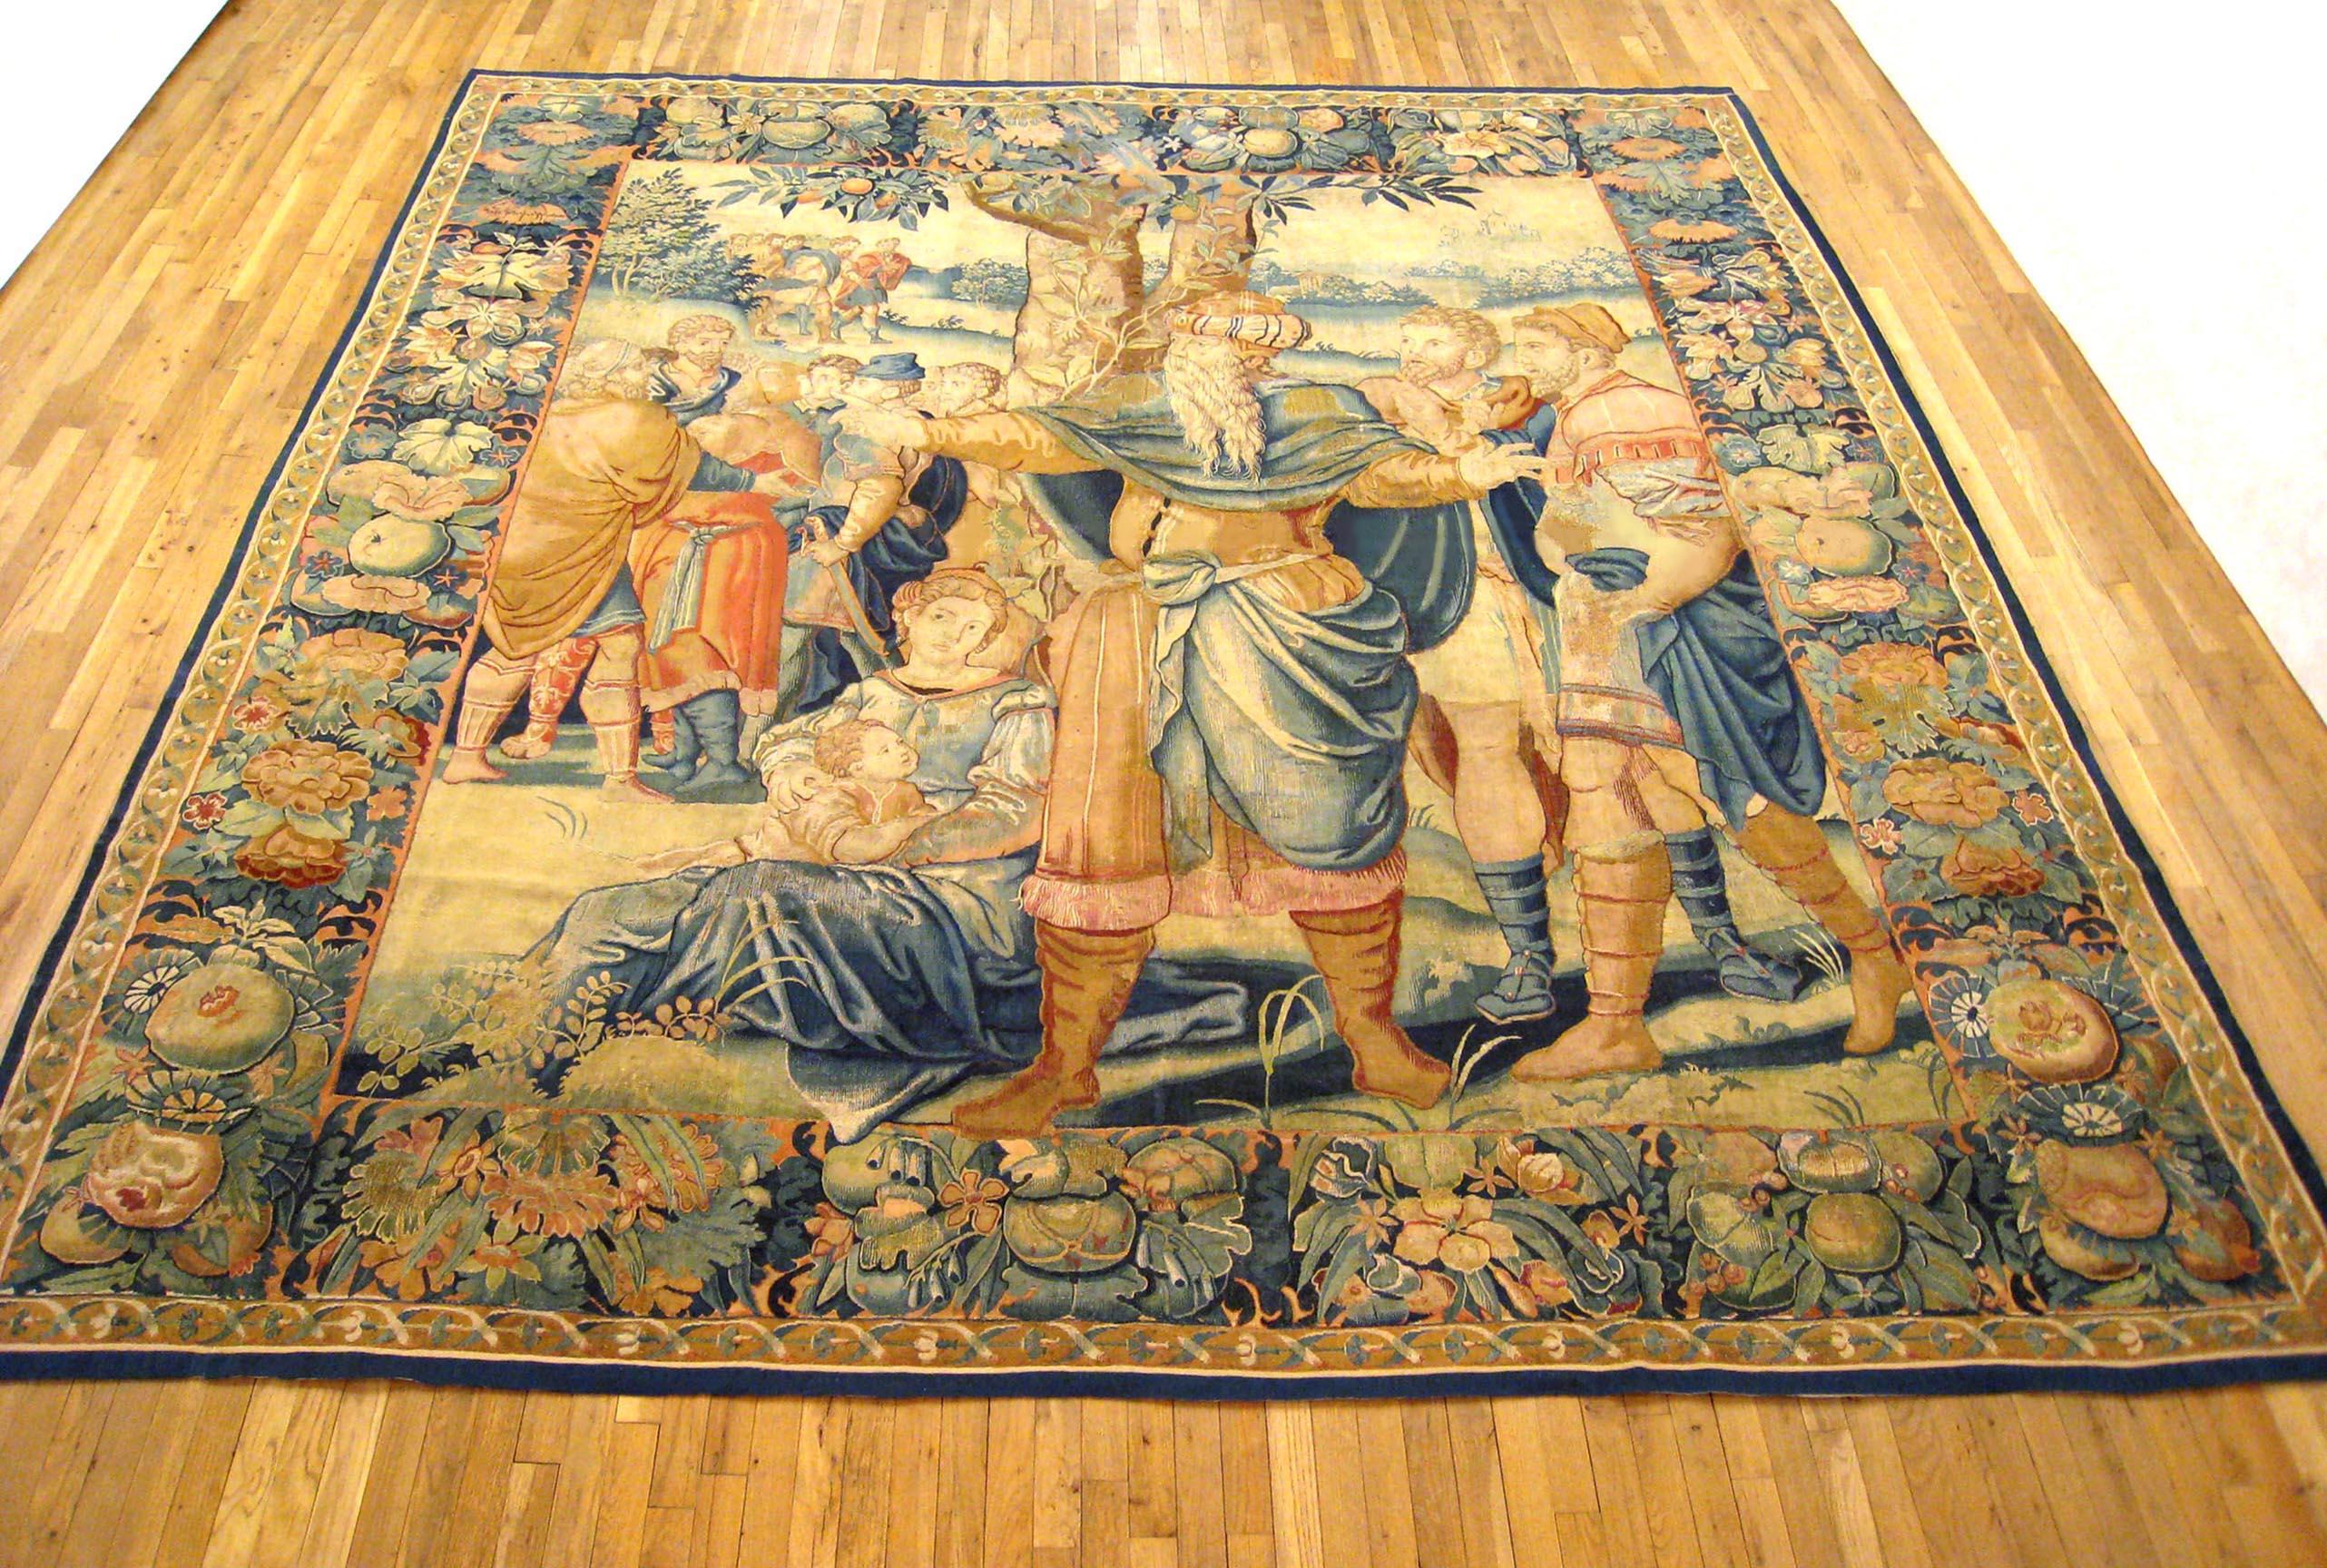 An antique 17th century Brussels Old Testament Biblical tapestry, size 11 'H x 10'10 W, featuring Isaac with his sons, Jacob and Esau, and other figures nearby. Enclosed within an elaborate foliate border. Wool with silk inlay. Linen backing. Very